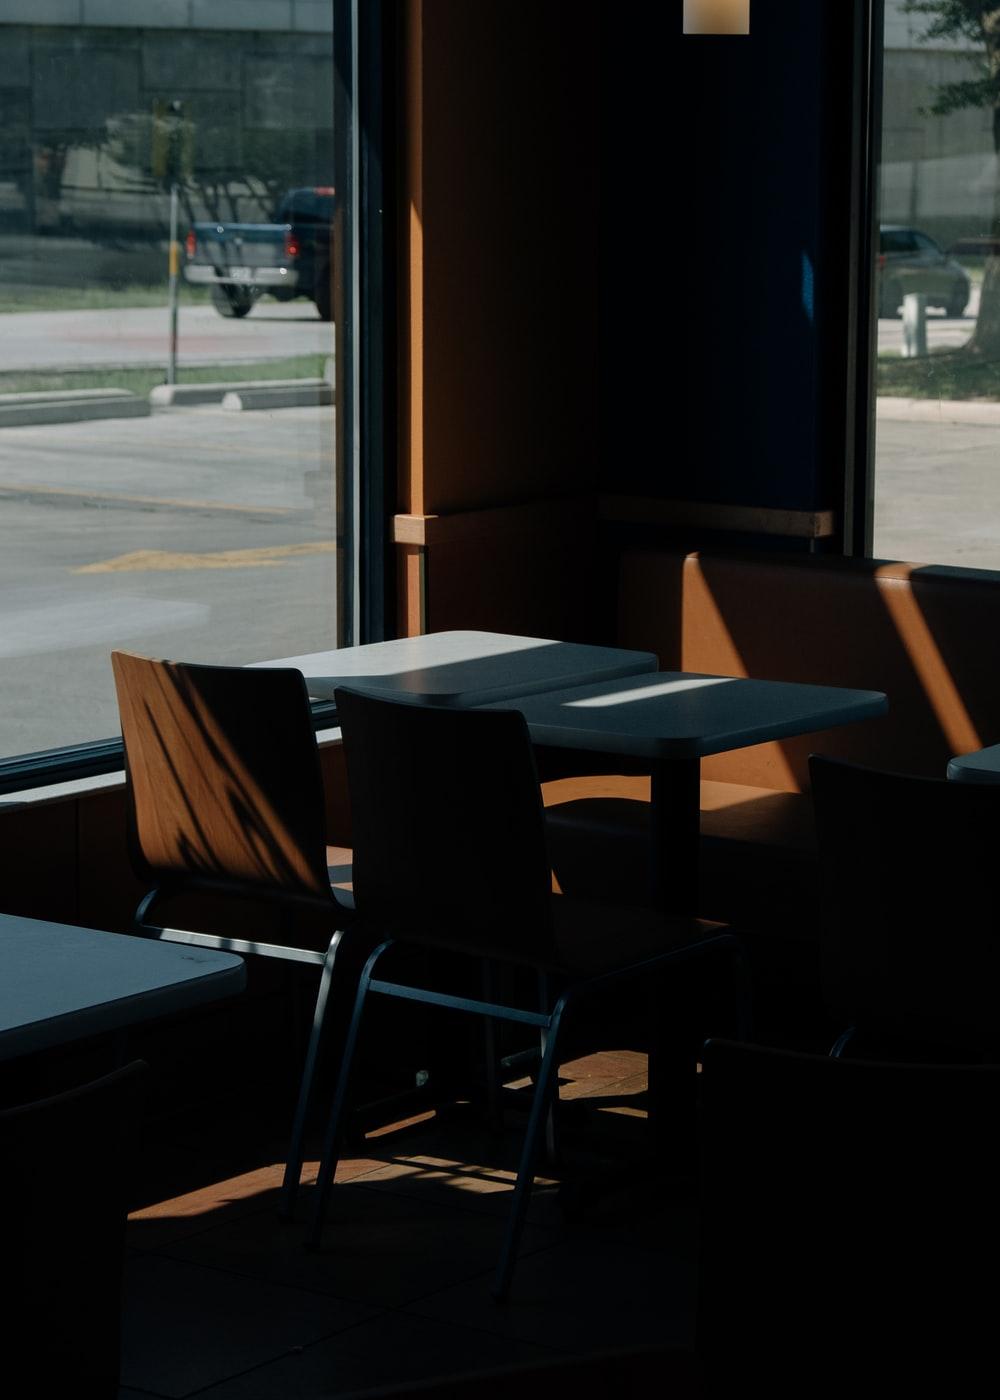 Taco Bell Picture. Download Free Image